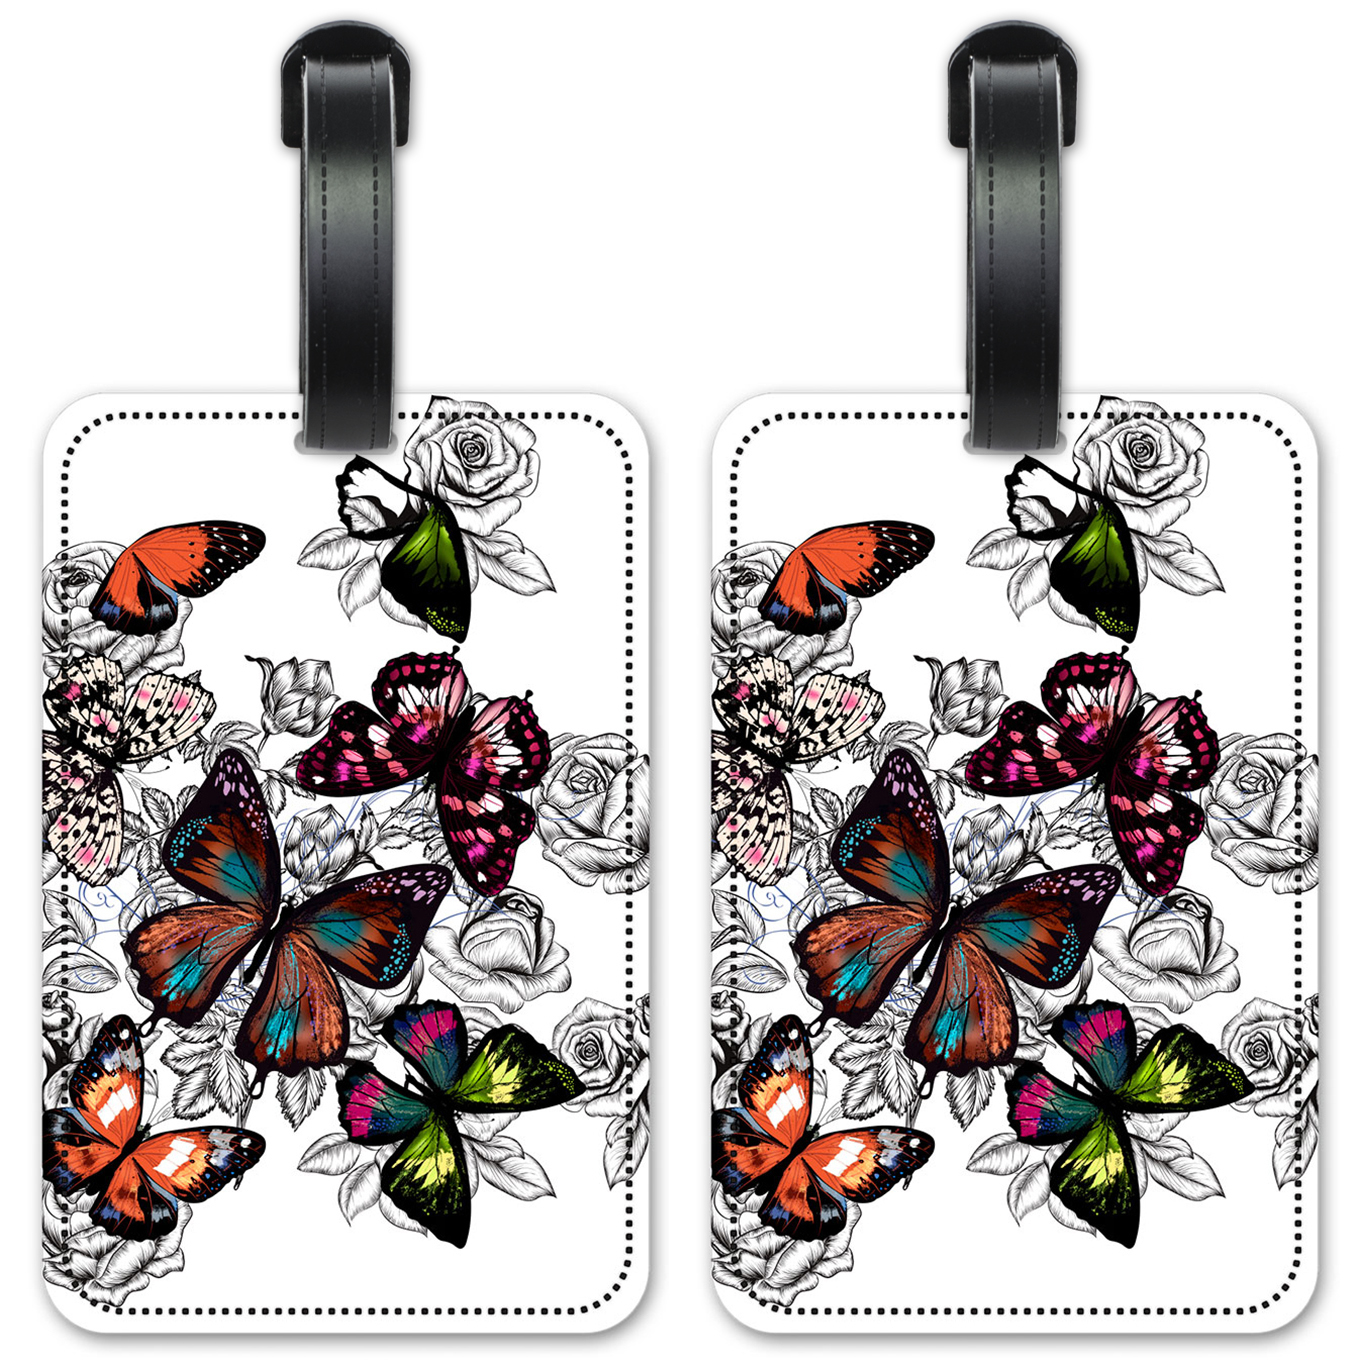 Colorful Butterflies with Roses - #2859